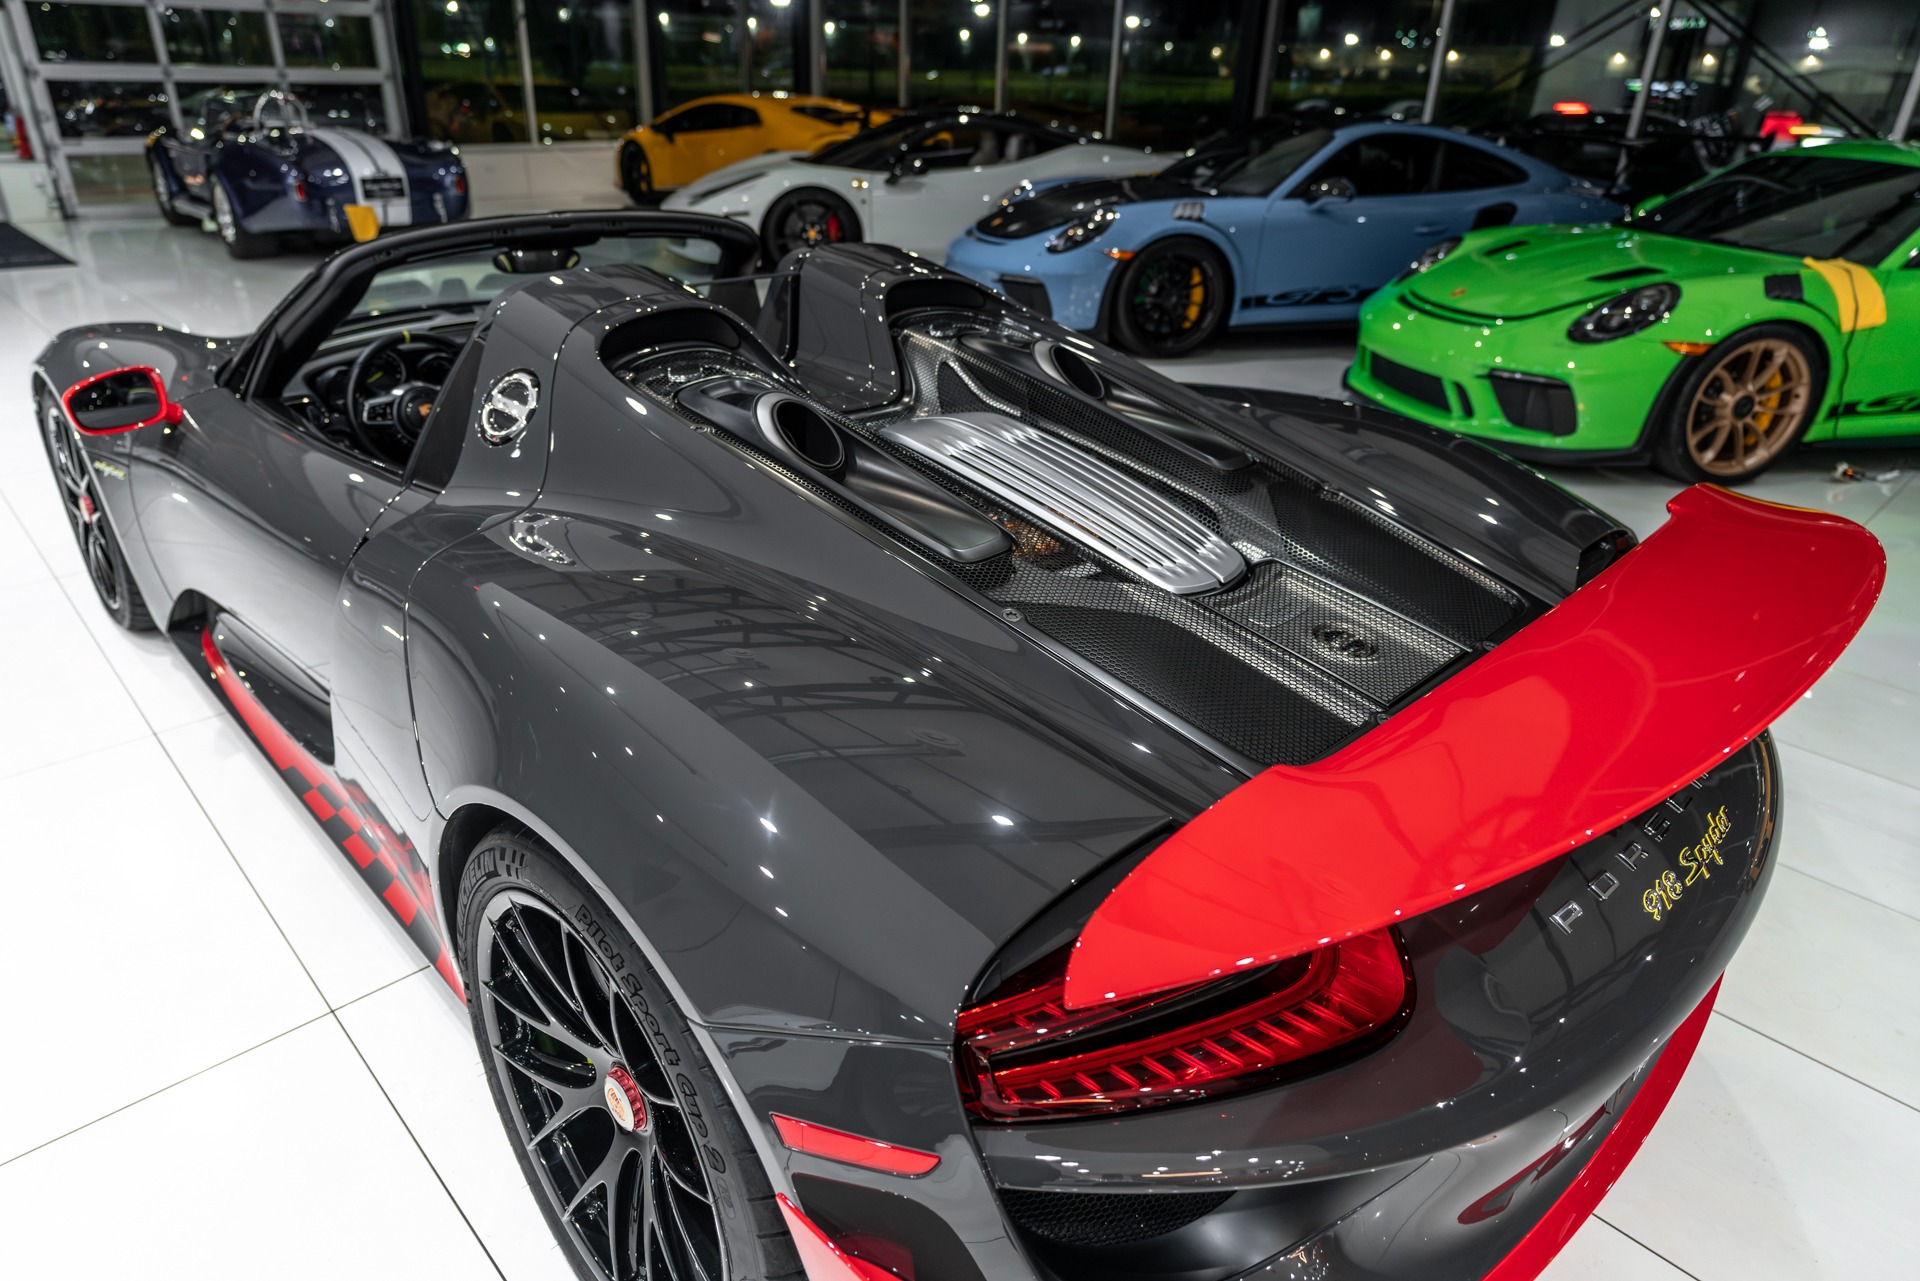 Used-2015-Porsche-918-Spyder-Weissach-Package-PTS-Grey-Black-Extremely-RARE-1-of-1-Spec